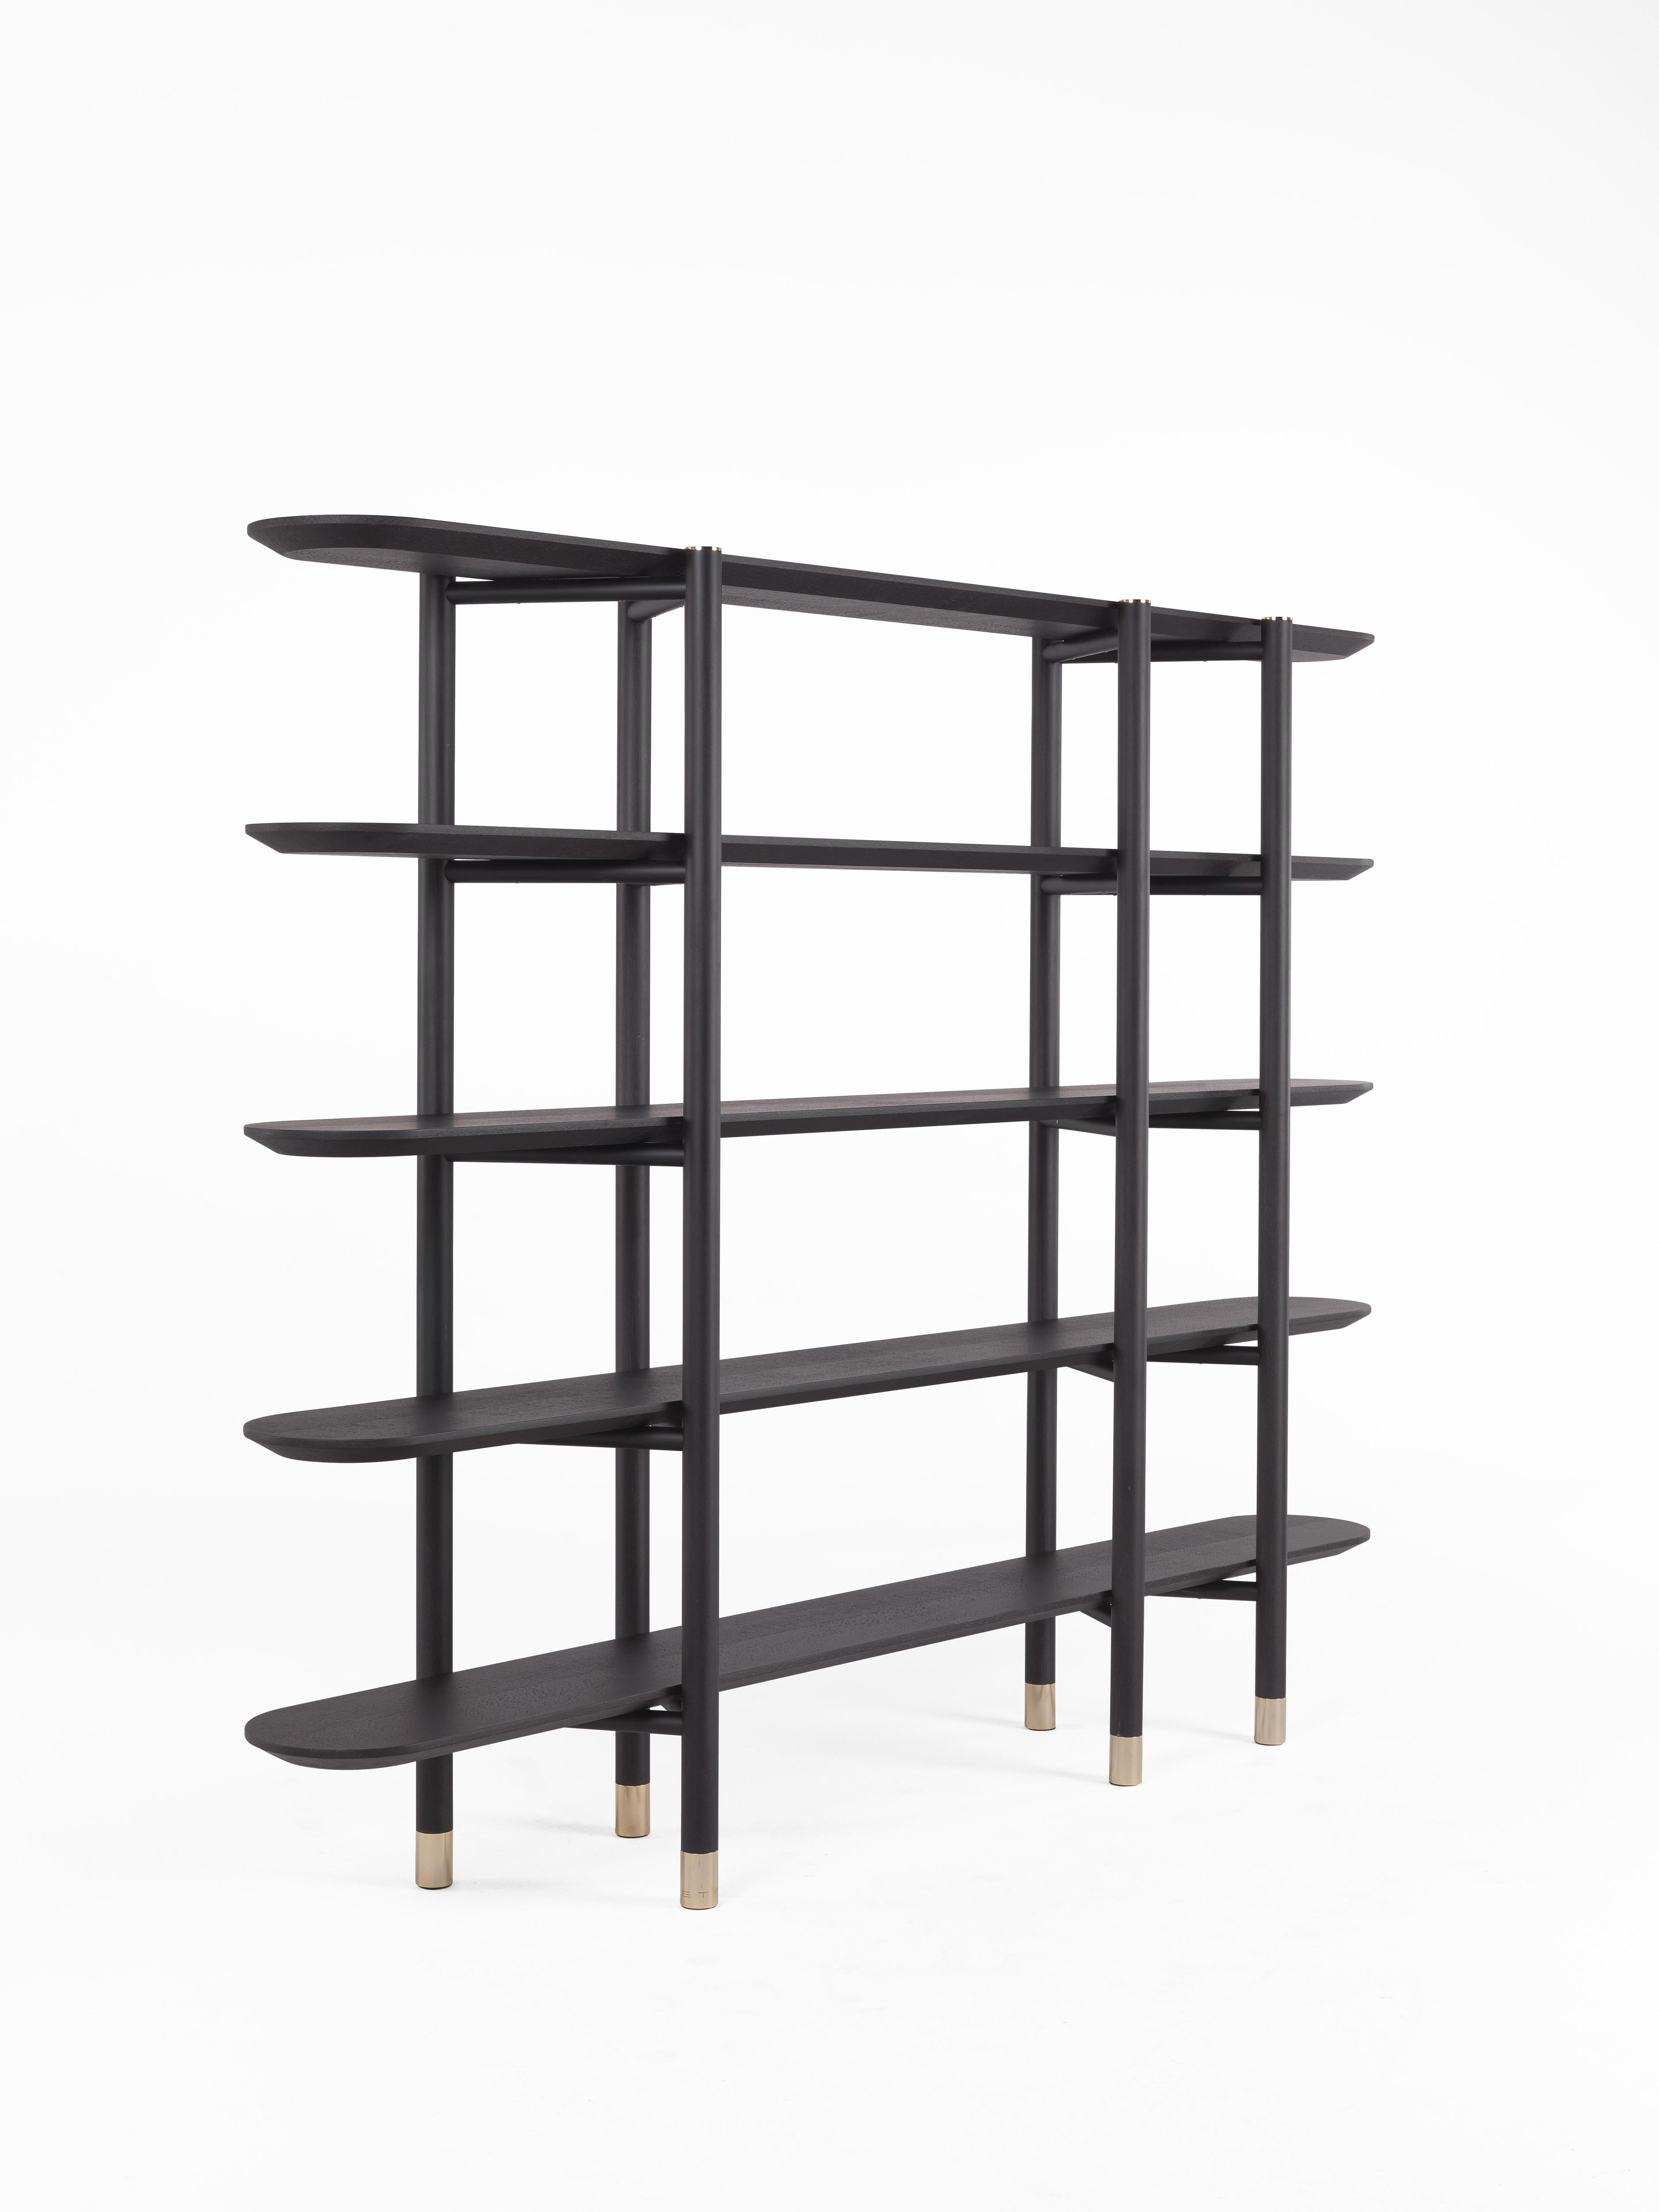 A bookcase with an original design and simple lines to complete Woodstock collection launched in 2018. The dark hues and the Carbalho essence recall the afro mood of the 2019 collection.

WOODSTOCK Bookcase with Structure in matte dark wengé dyed